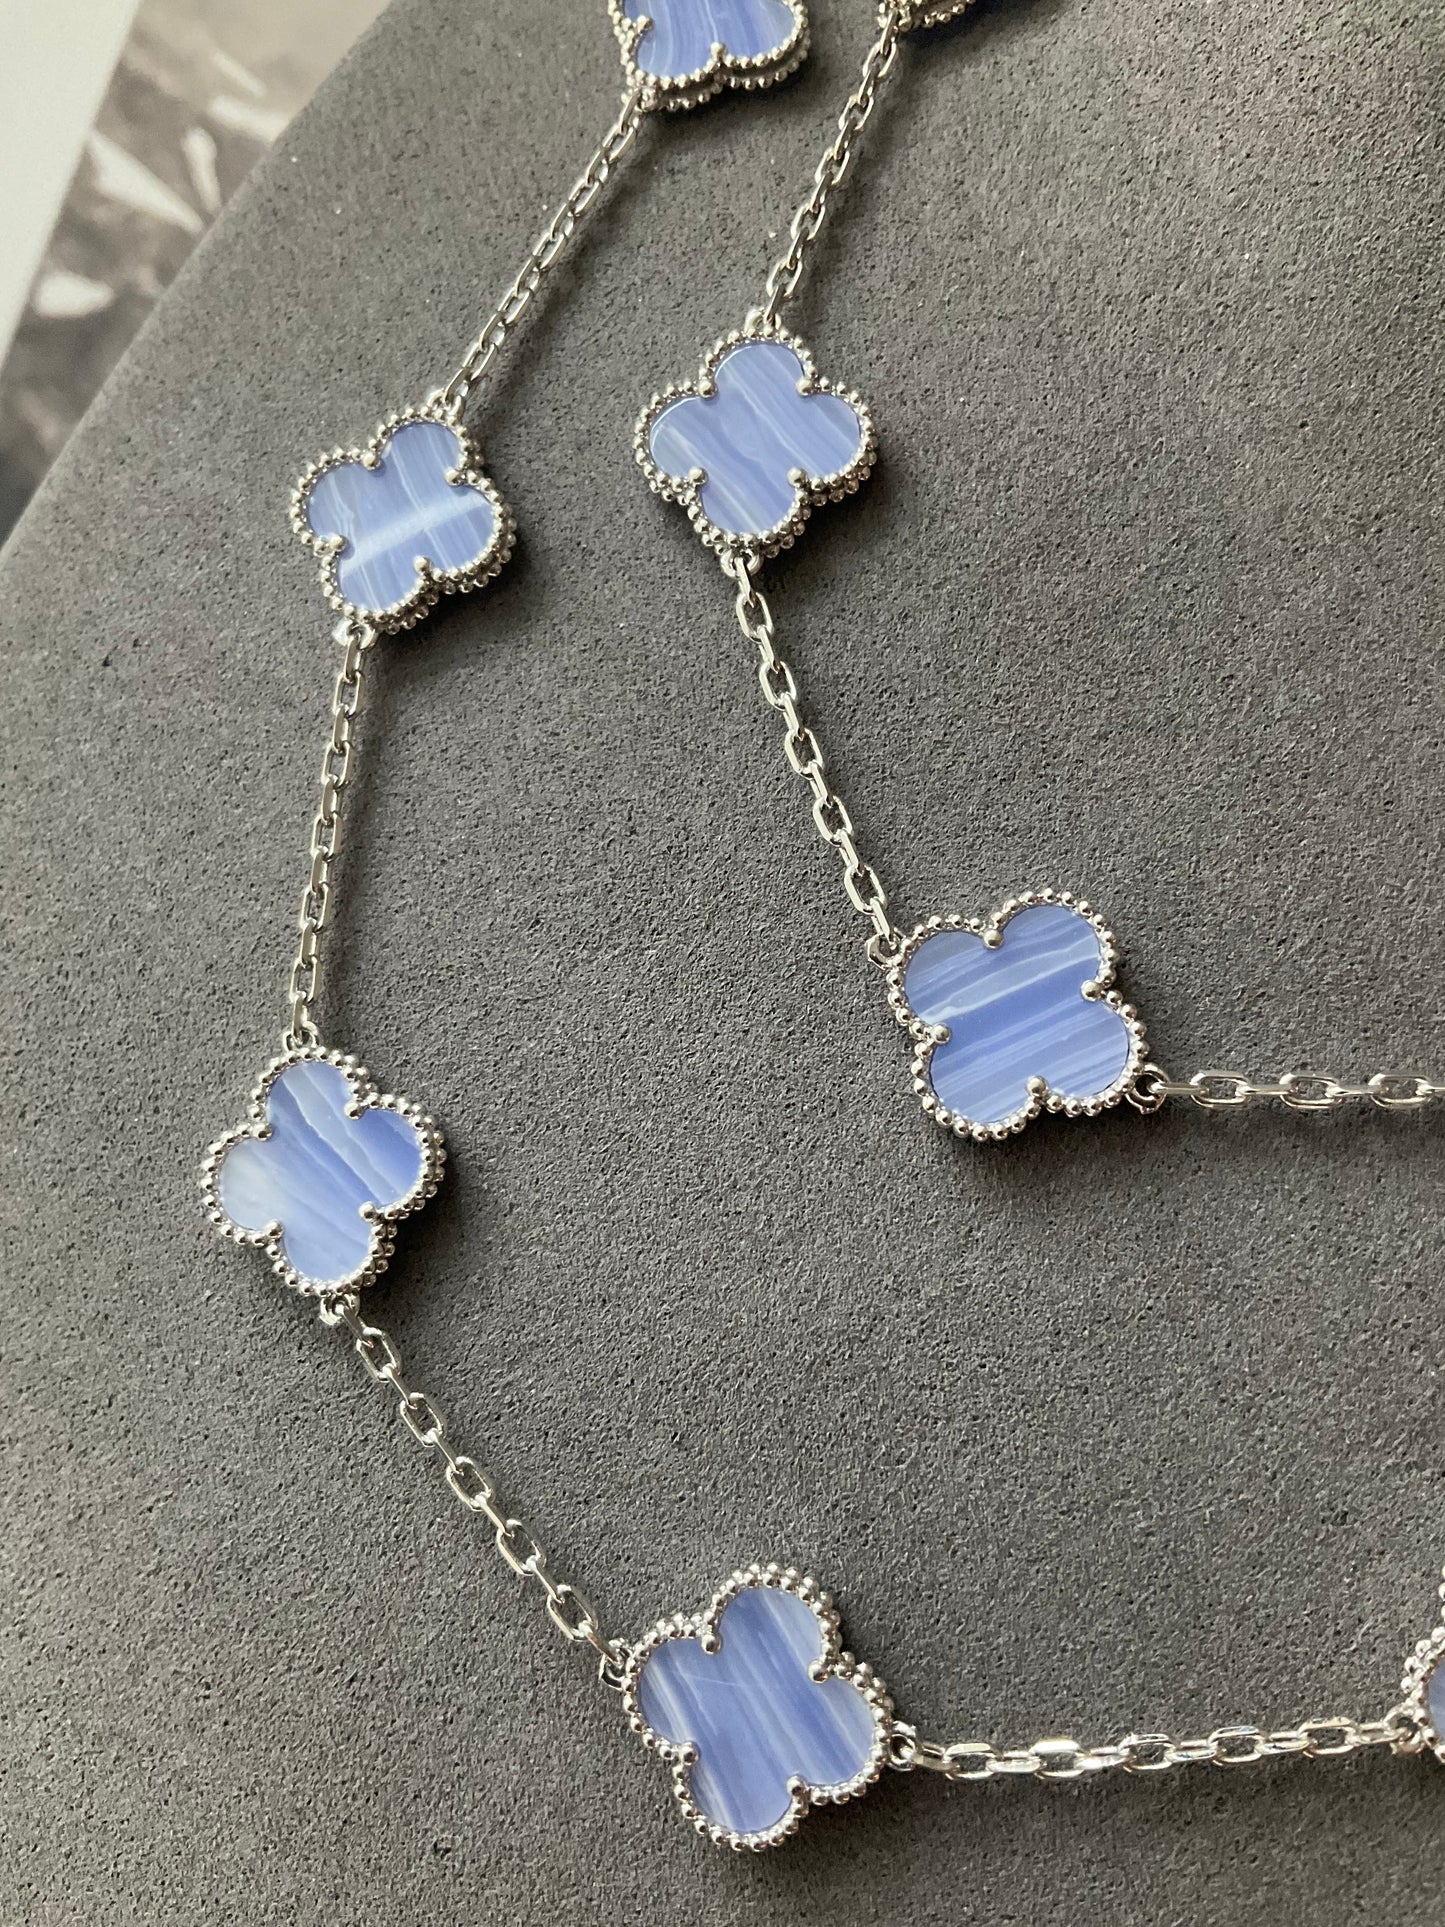 20 motifs chalcedony White Gold Plated Four Leaf Clover Flower Style S 925 Silver Necklace 84cm - ParadiseKissCo